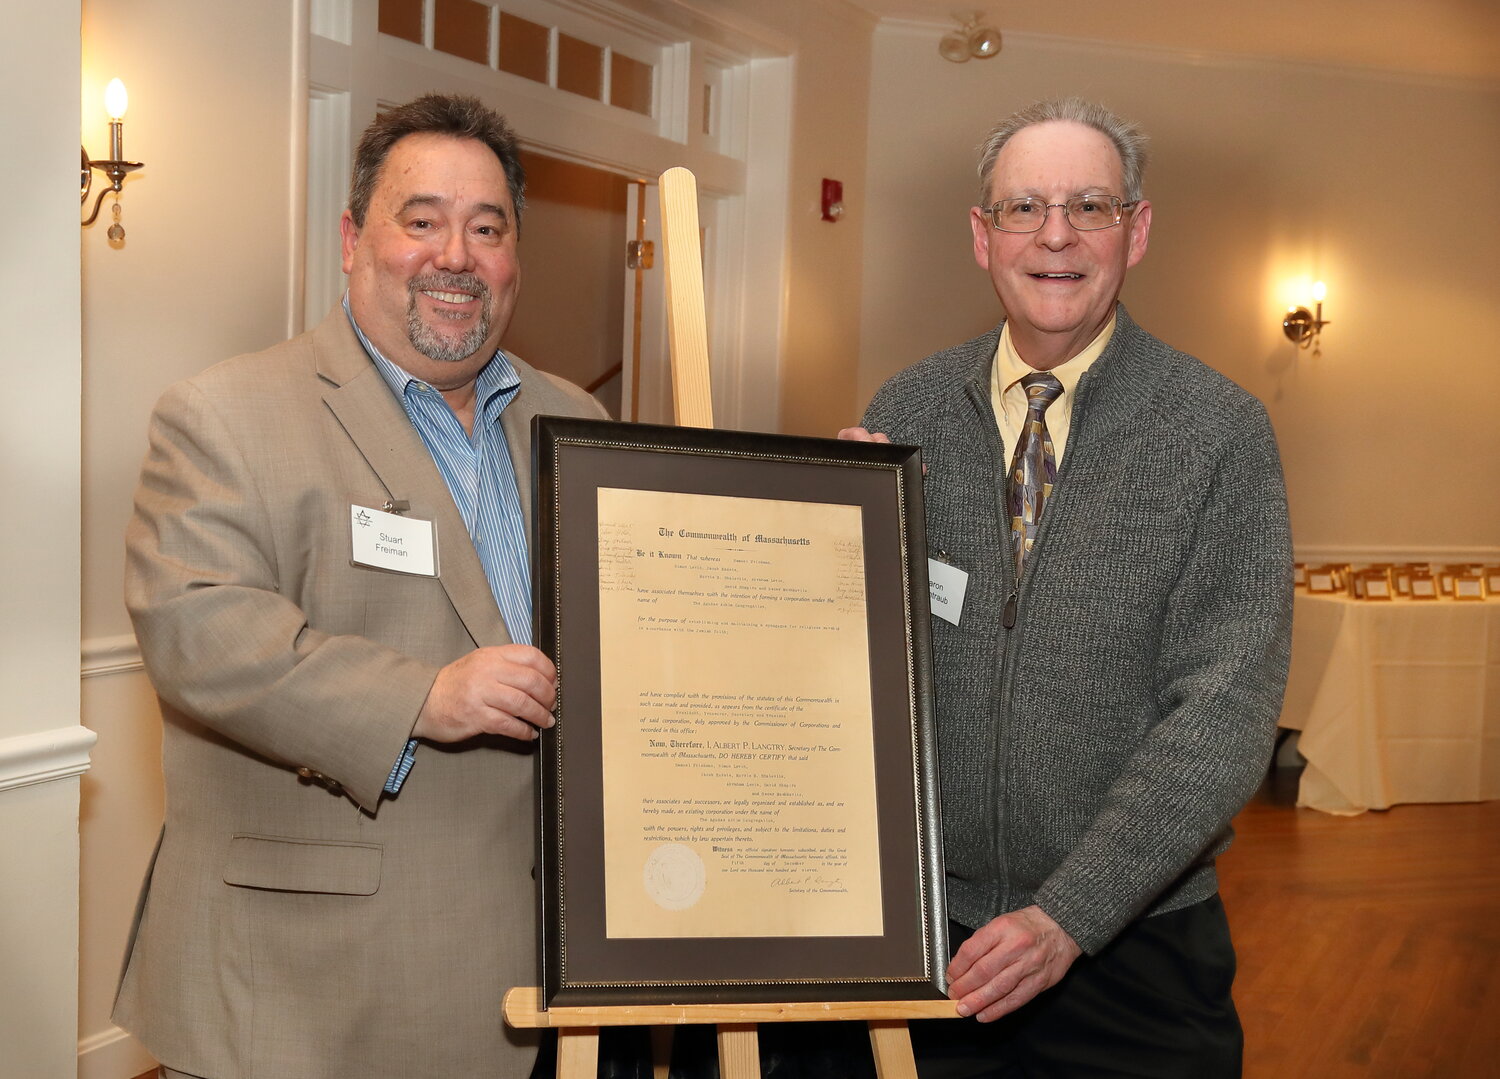 Stuart Freiman and Aaron Weintraub unveiled a reproduction of Congregation Agudas Achim’s newly restored and preserved Articles of Incorporation.